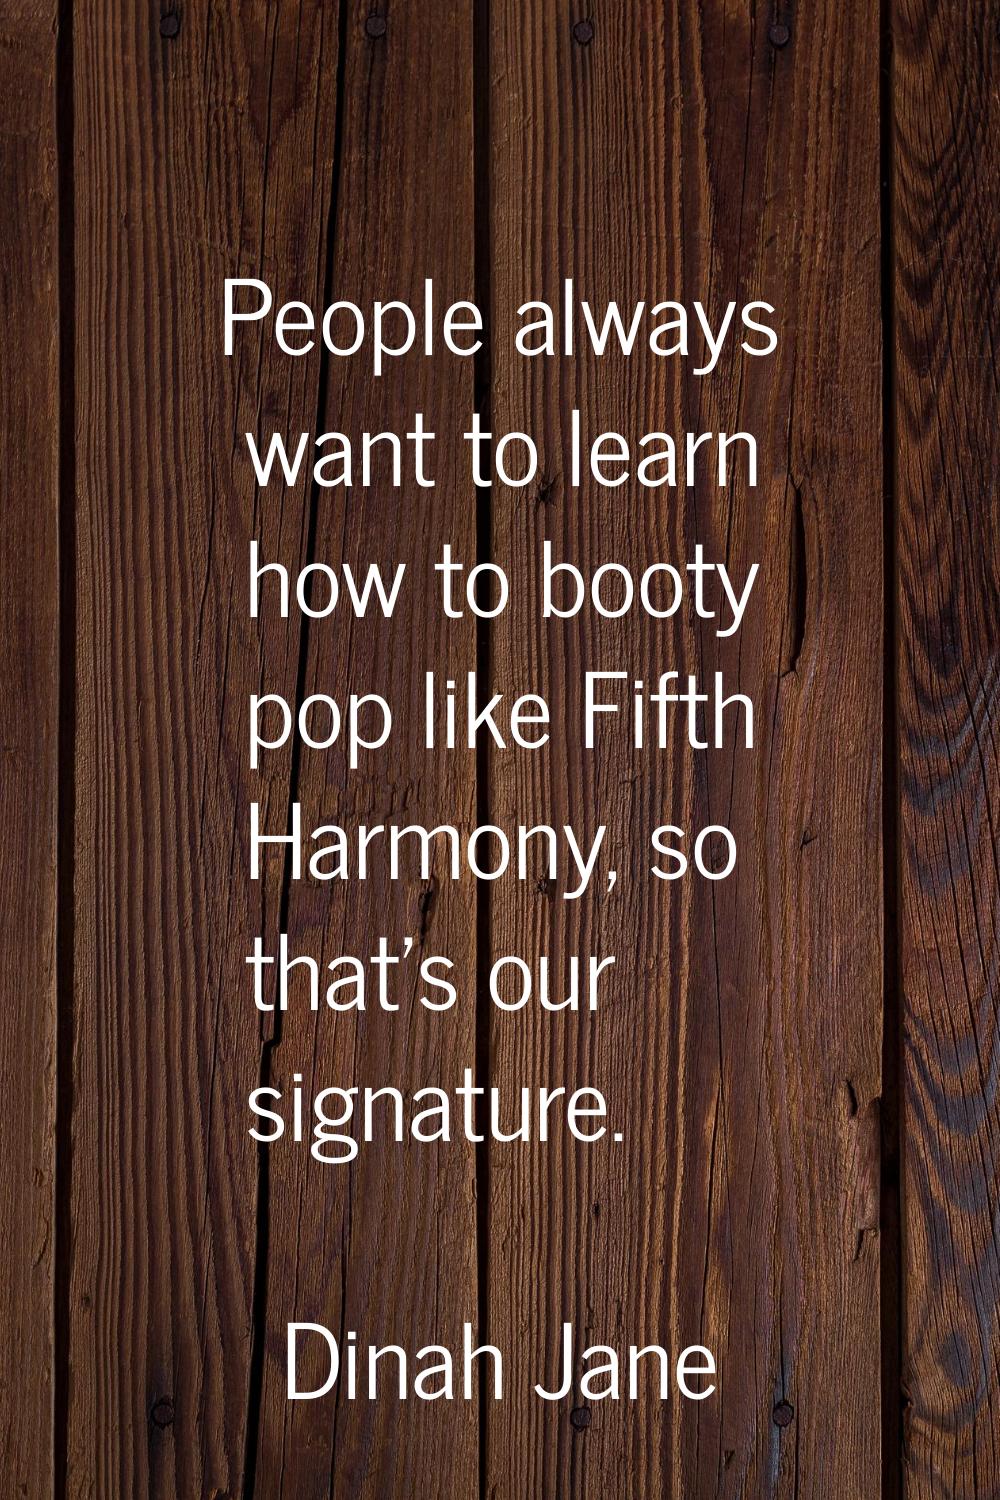 People always want to learn how to booty pop like Fifth Harmony, so that's our signature.